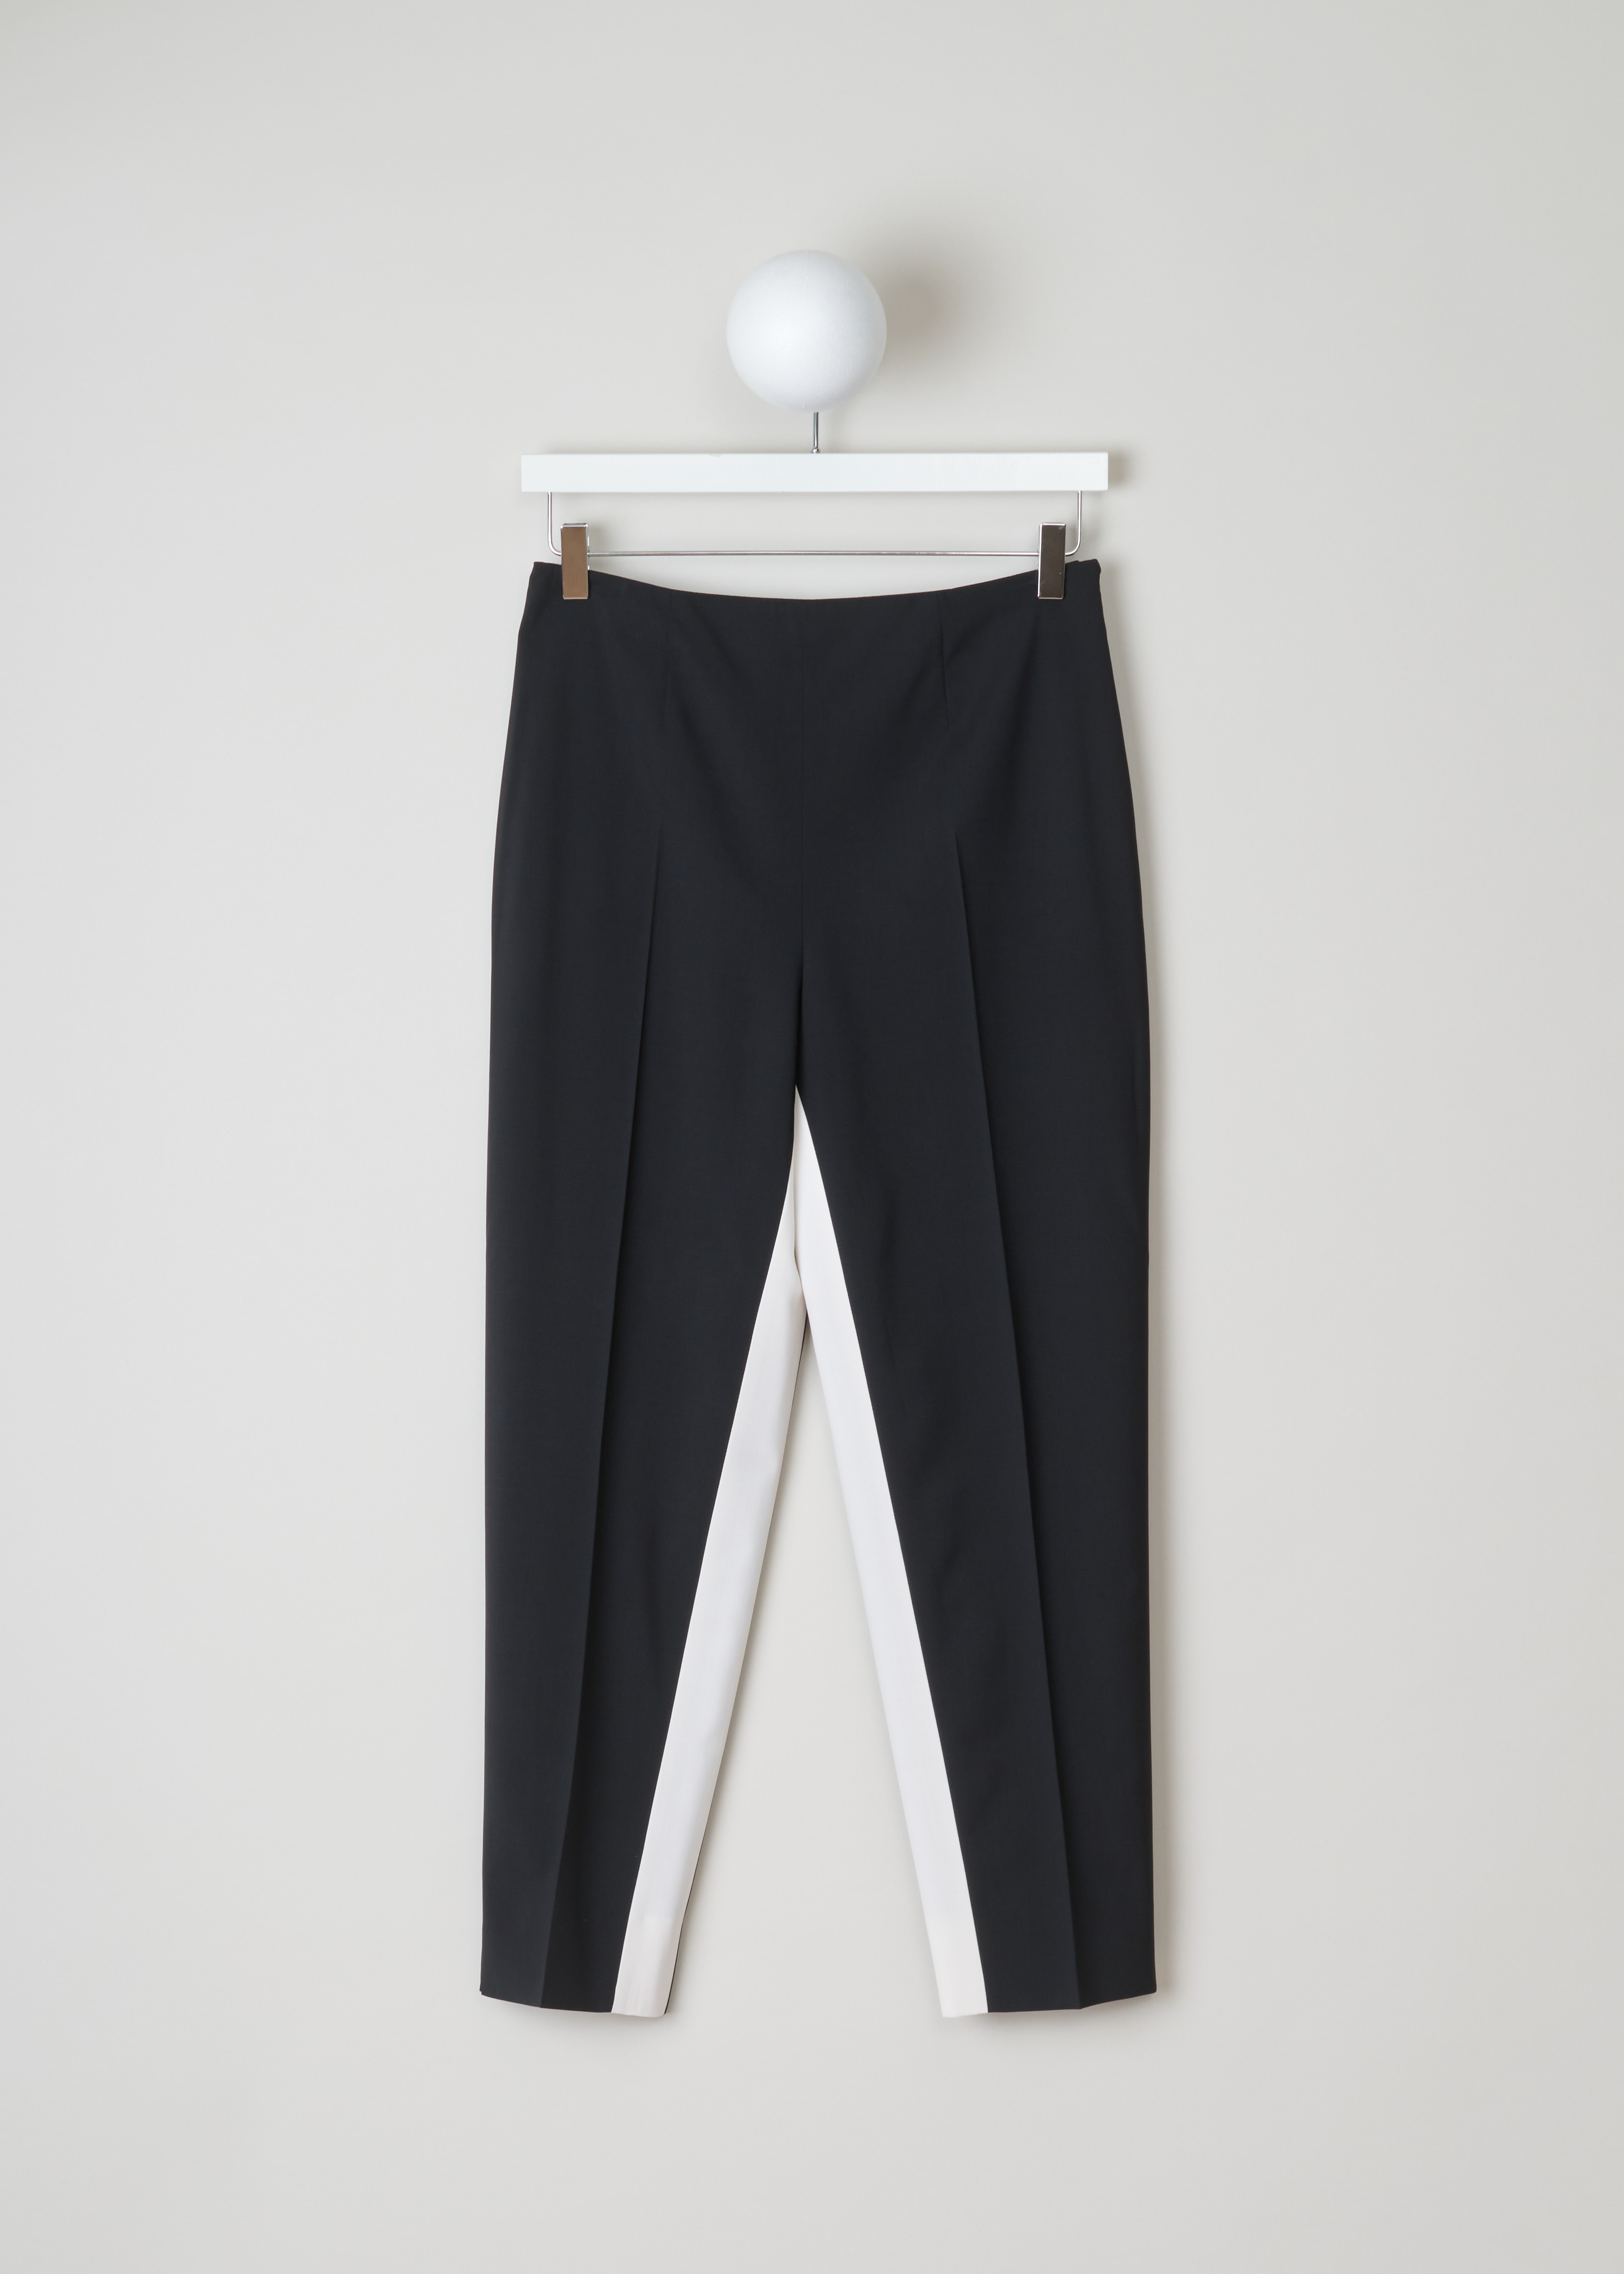 Prada Black and white pants Lana_Leggera_P2798_F0967_Nero_Bianco nero bianco front. Black trousers with a white panel on the inside of the legs, centre creases and an invisible zipper on the side.